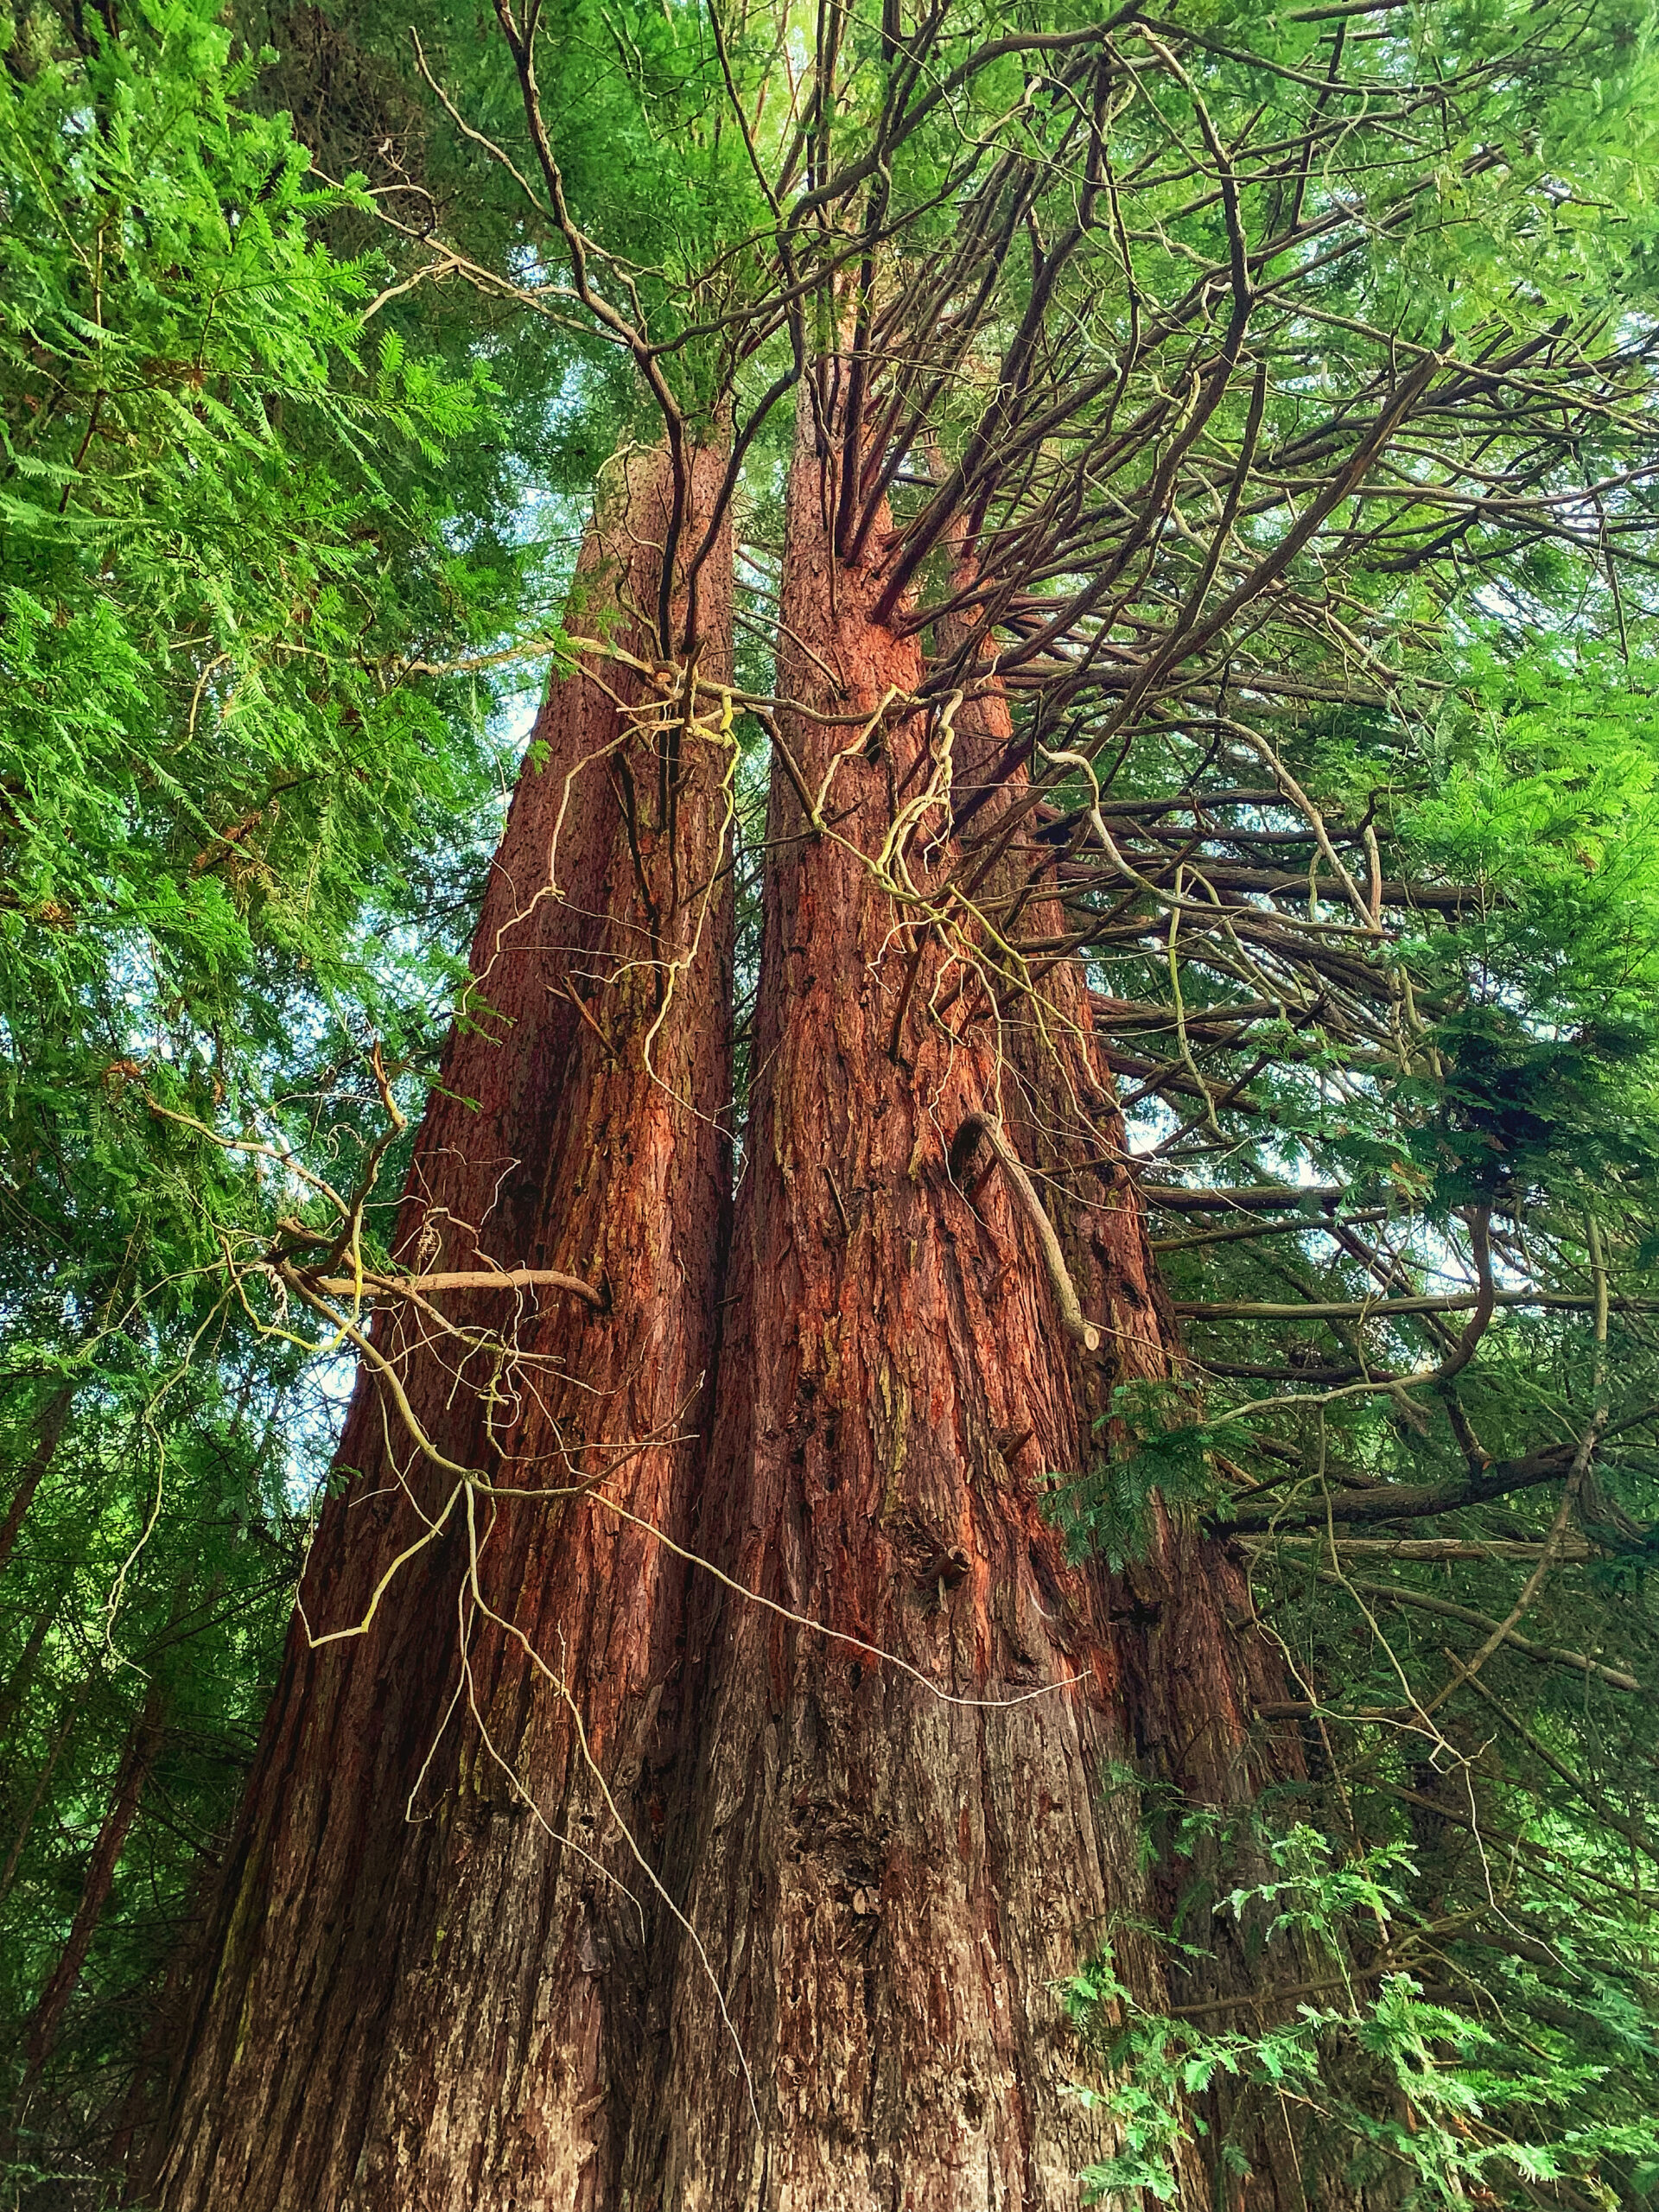 The tallest redwood tree in california.